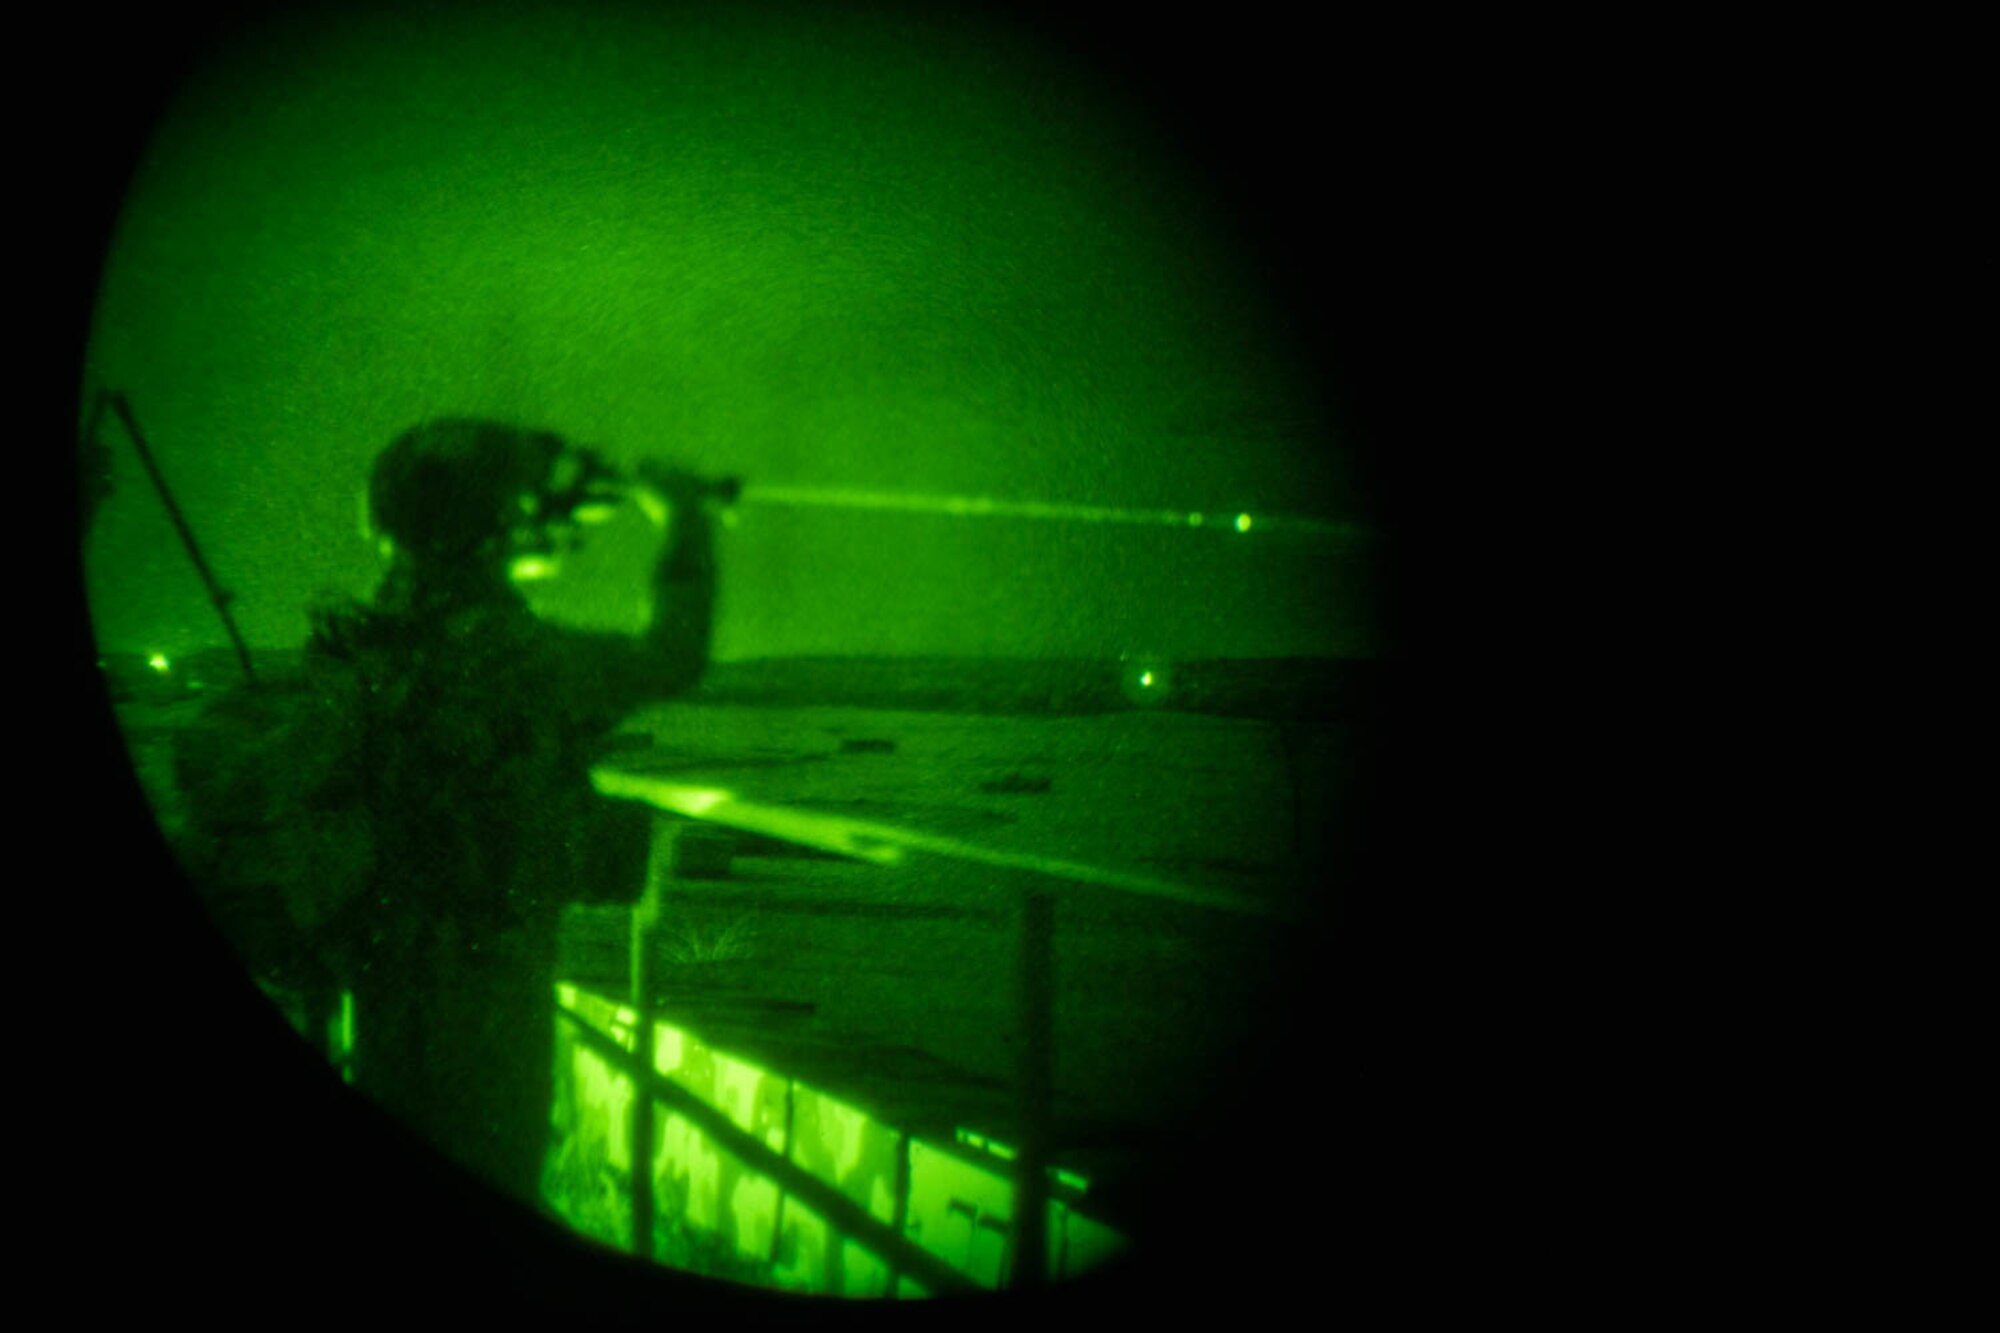 Person in night vision lens